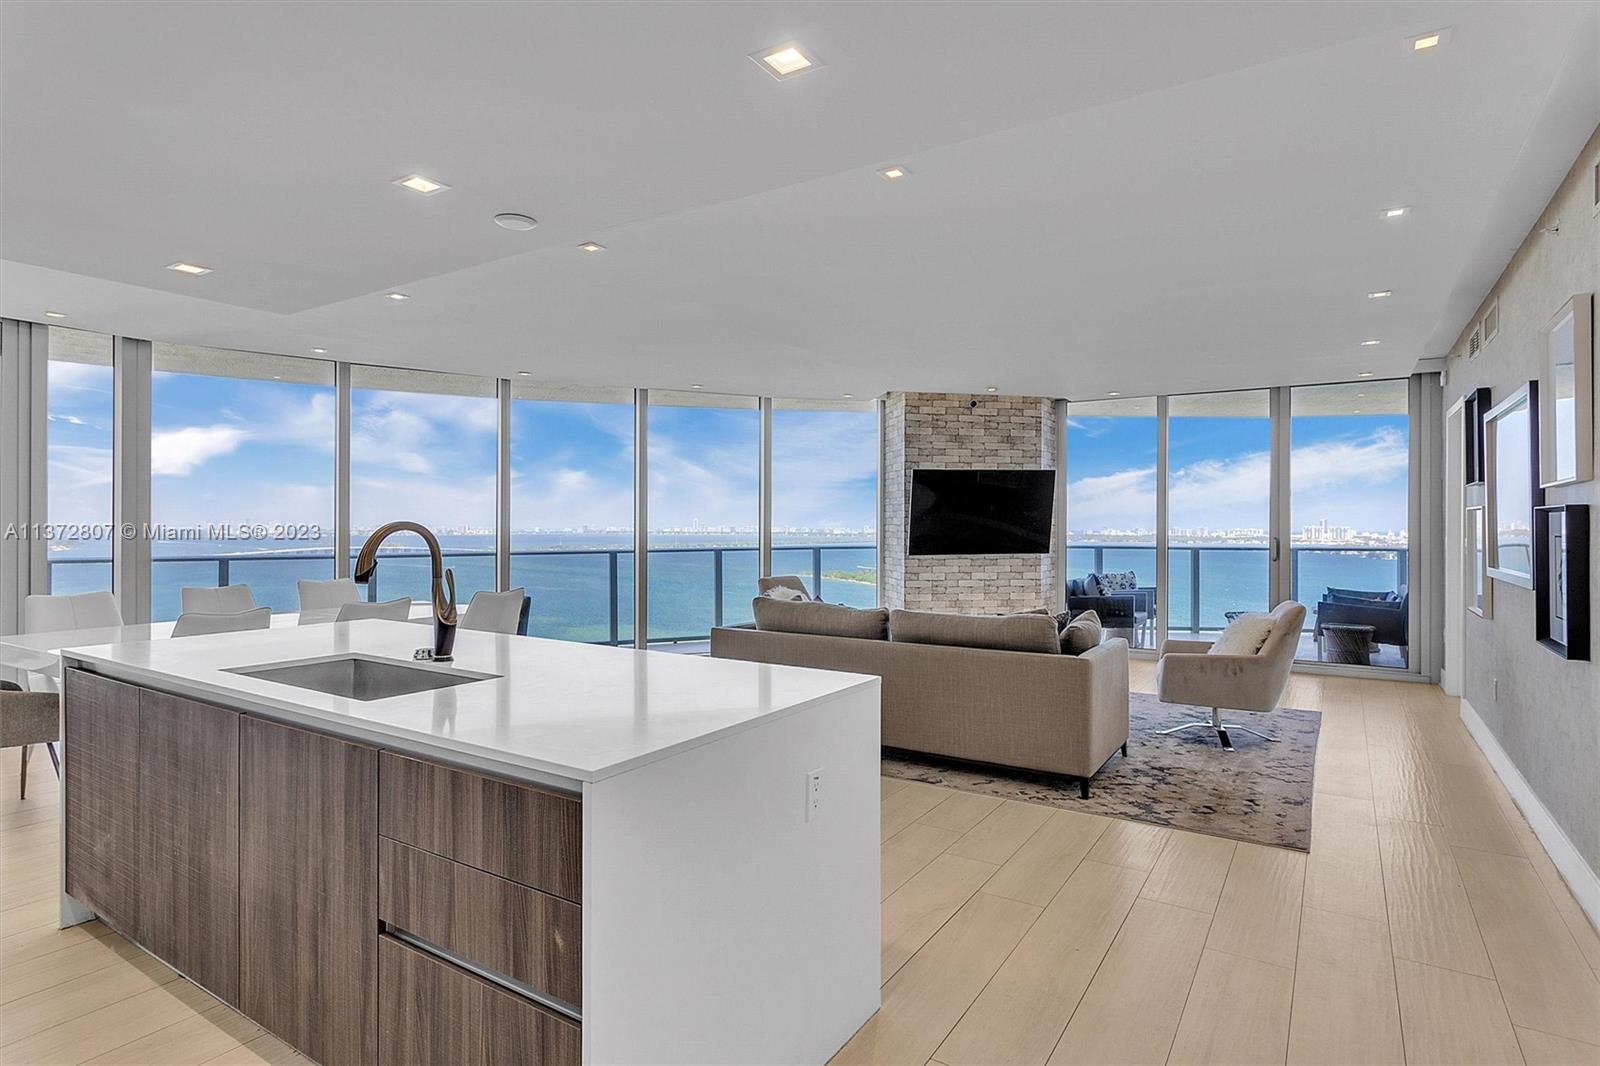 Photo 1 of Aria on the Bay Aria Apt 2315 in Miami - MLS A11372807